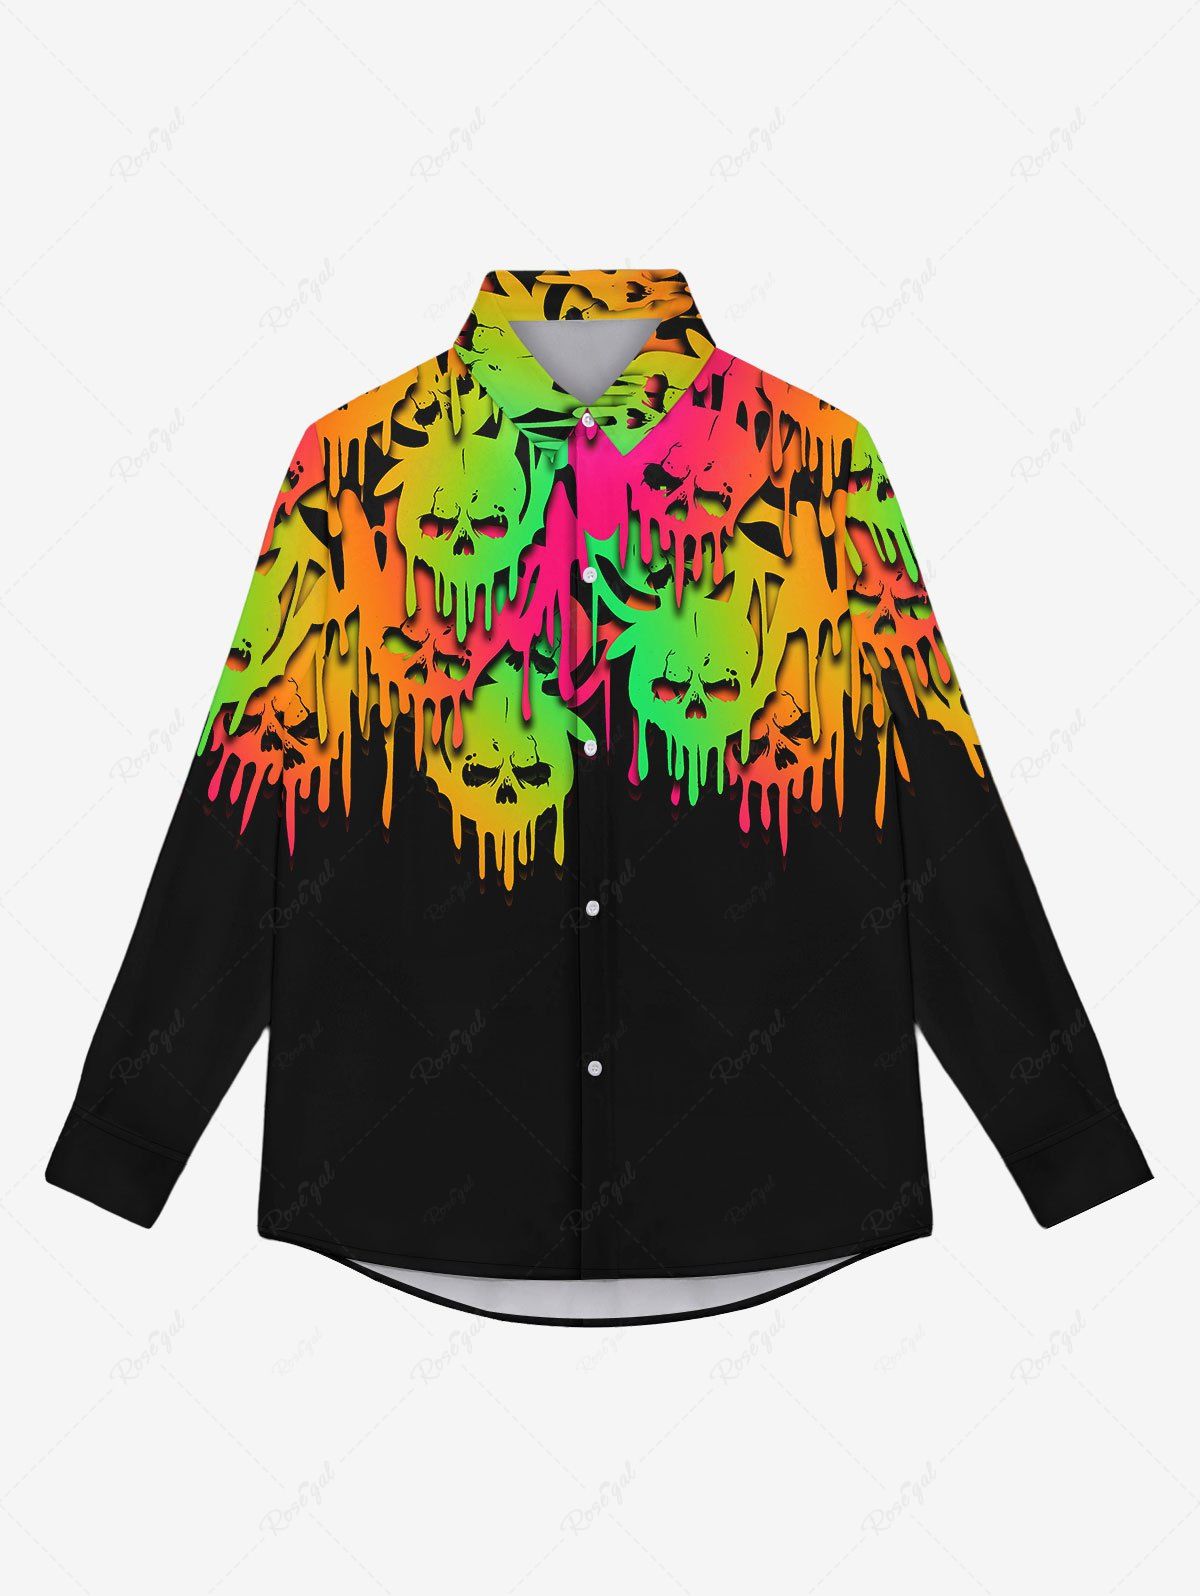 Unique Gothic Turn-down Collar Ombre Paint Drop Skulls Print Full Buttons Shirt For Men  